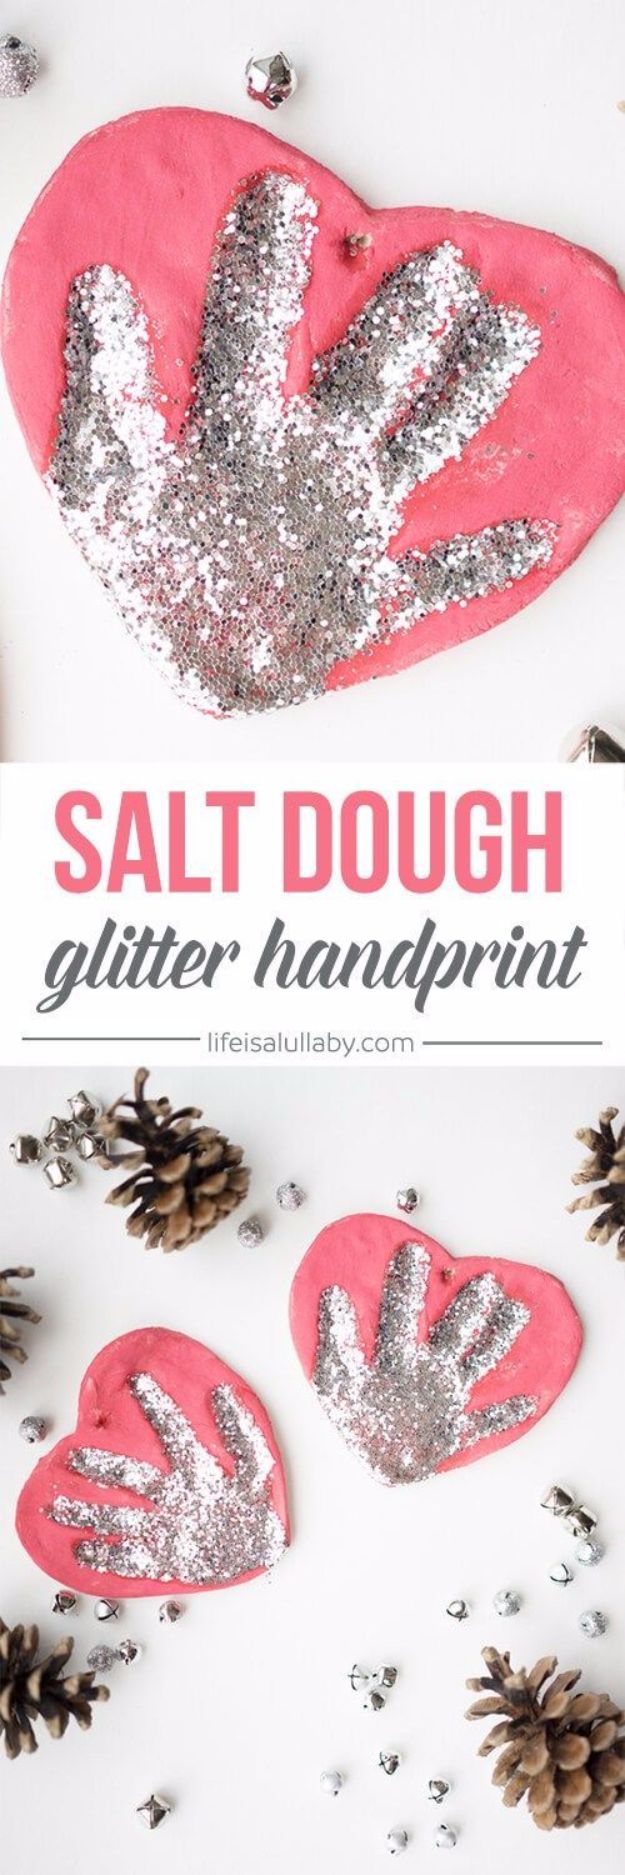 DIY Ideas WIth Glitter - Salt Dough Handprint Ornament - Easy Crafts and Projects for Decoration, Gifts, and Bedroom Decor - How To Make Ombre, Mod Podge and Glitter Mason Jar Gift Ideas For Teens - Easy Clothes and Makeup Crafts For Teenagers #diyideas #glitter #crafts